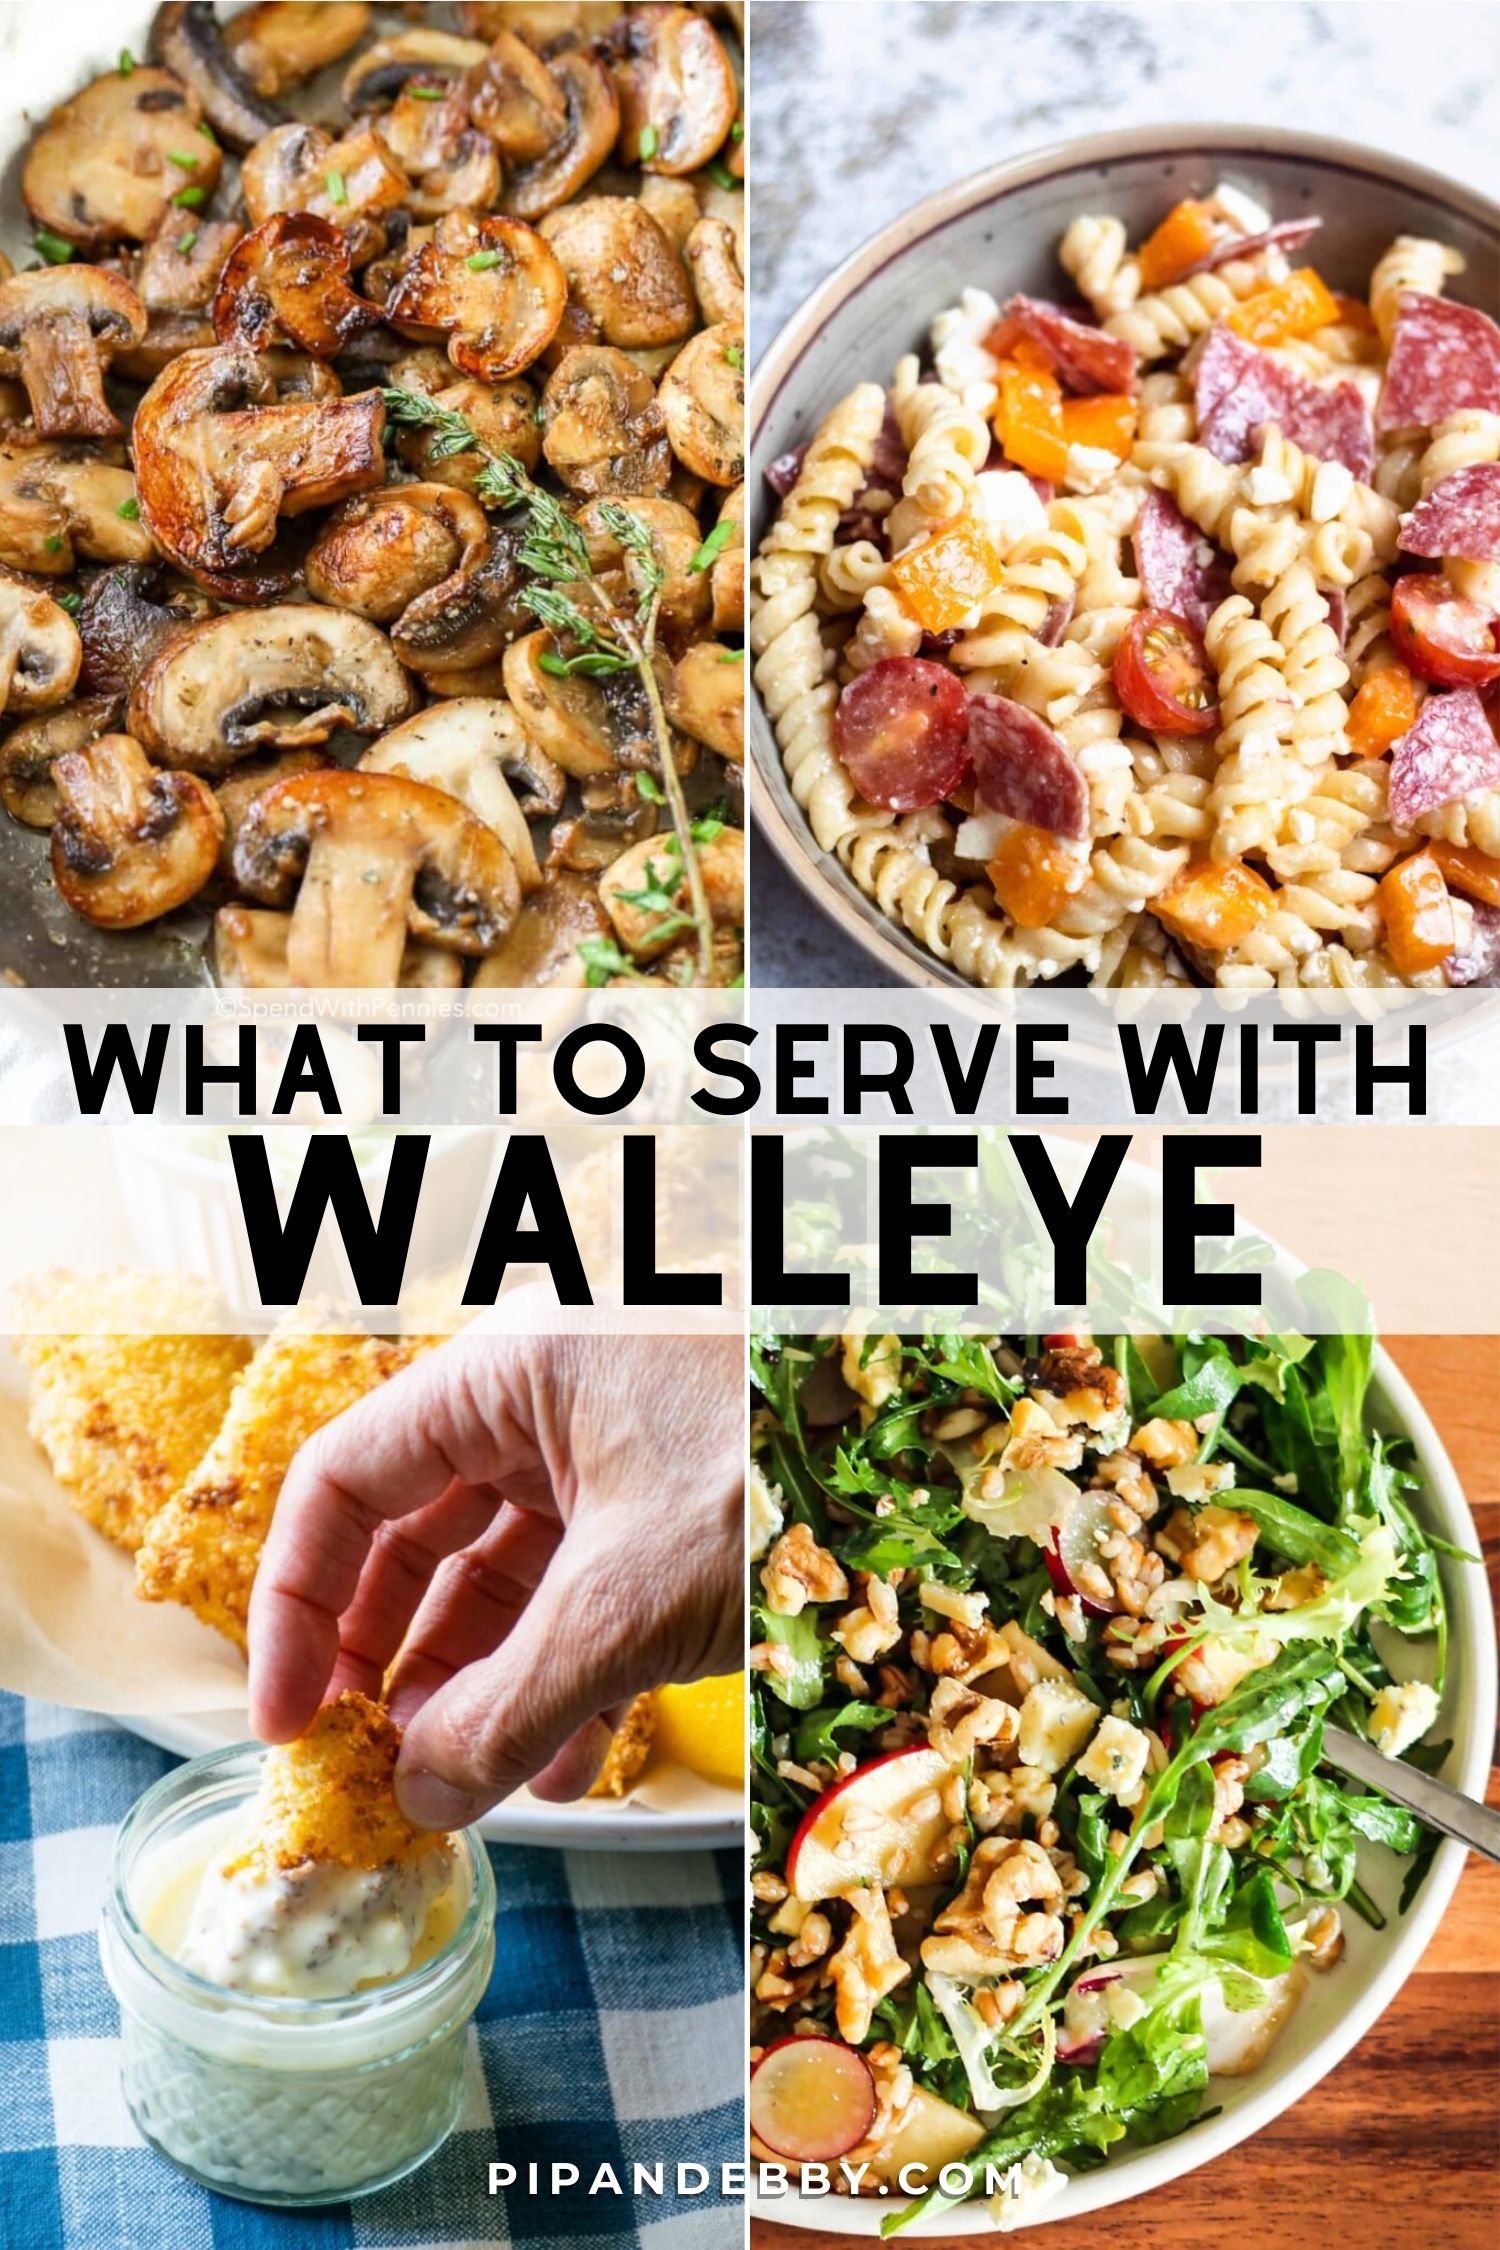 Grid of four food photos with text overlay reading, "What to serve with walleye."